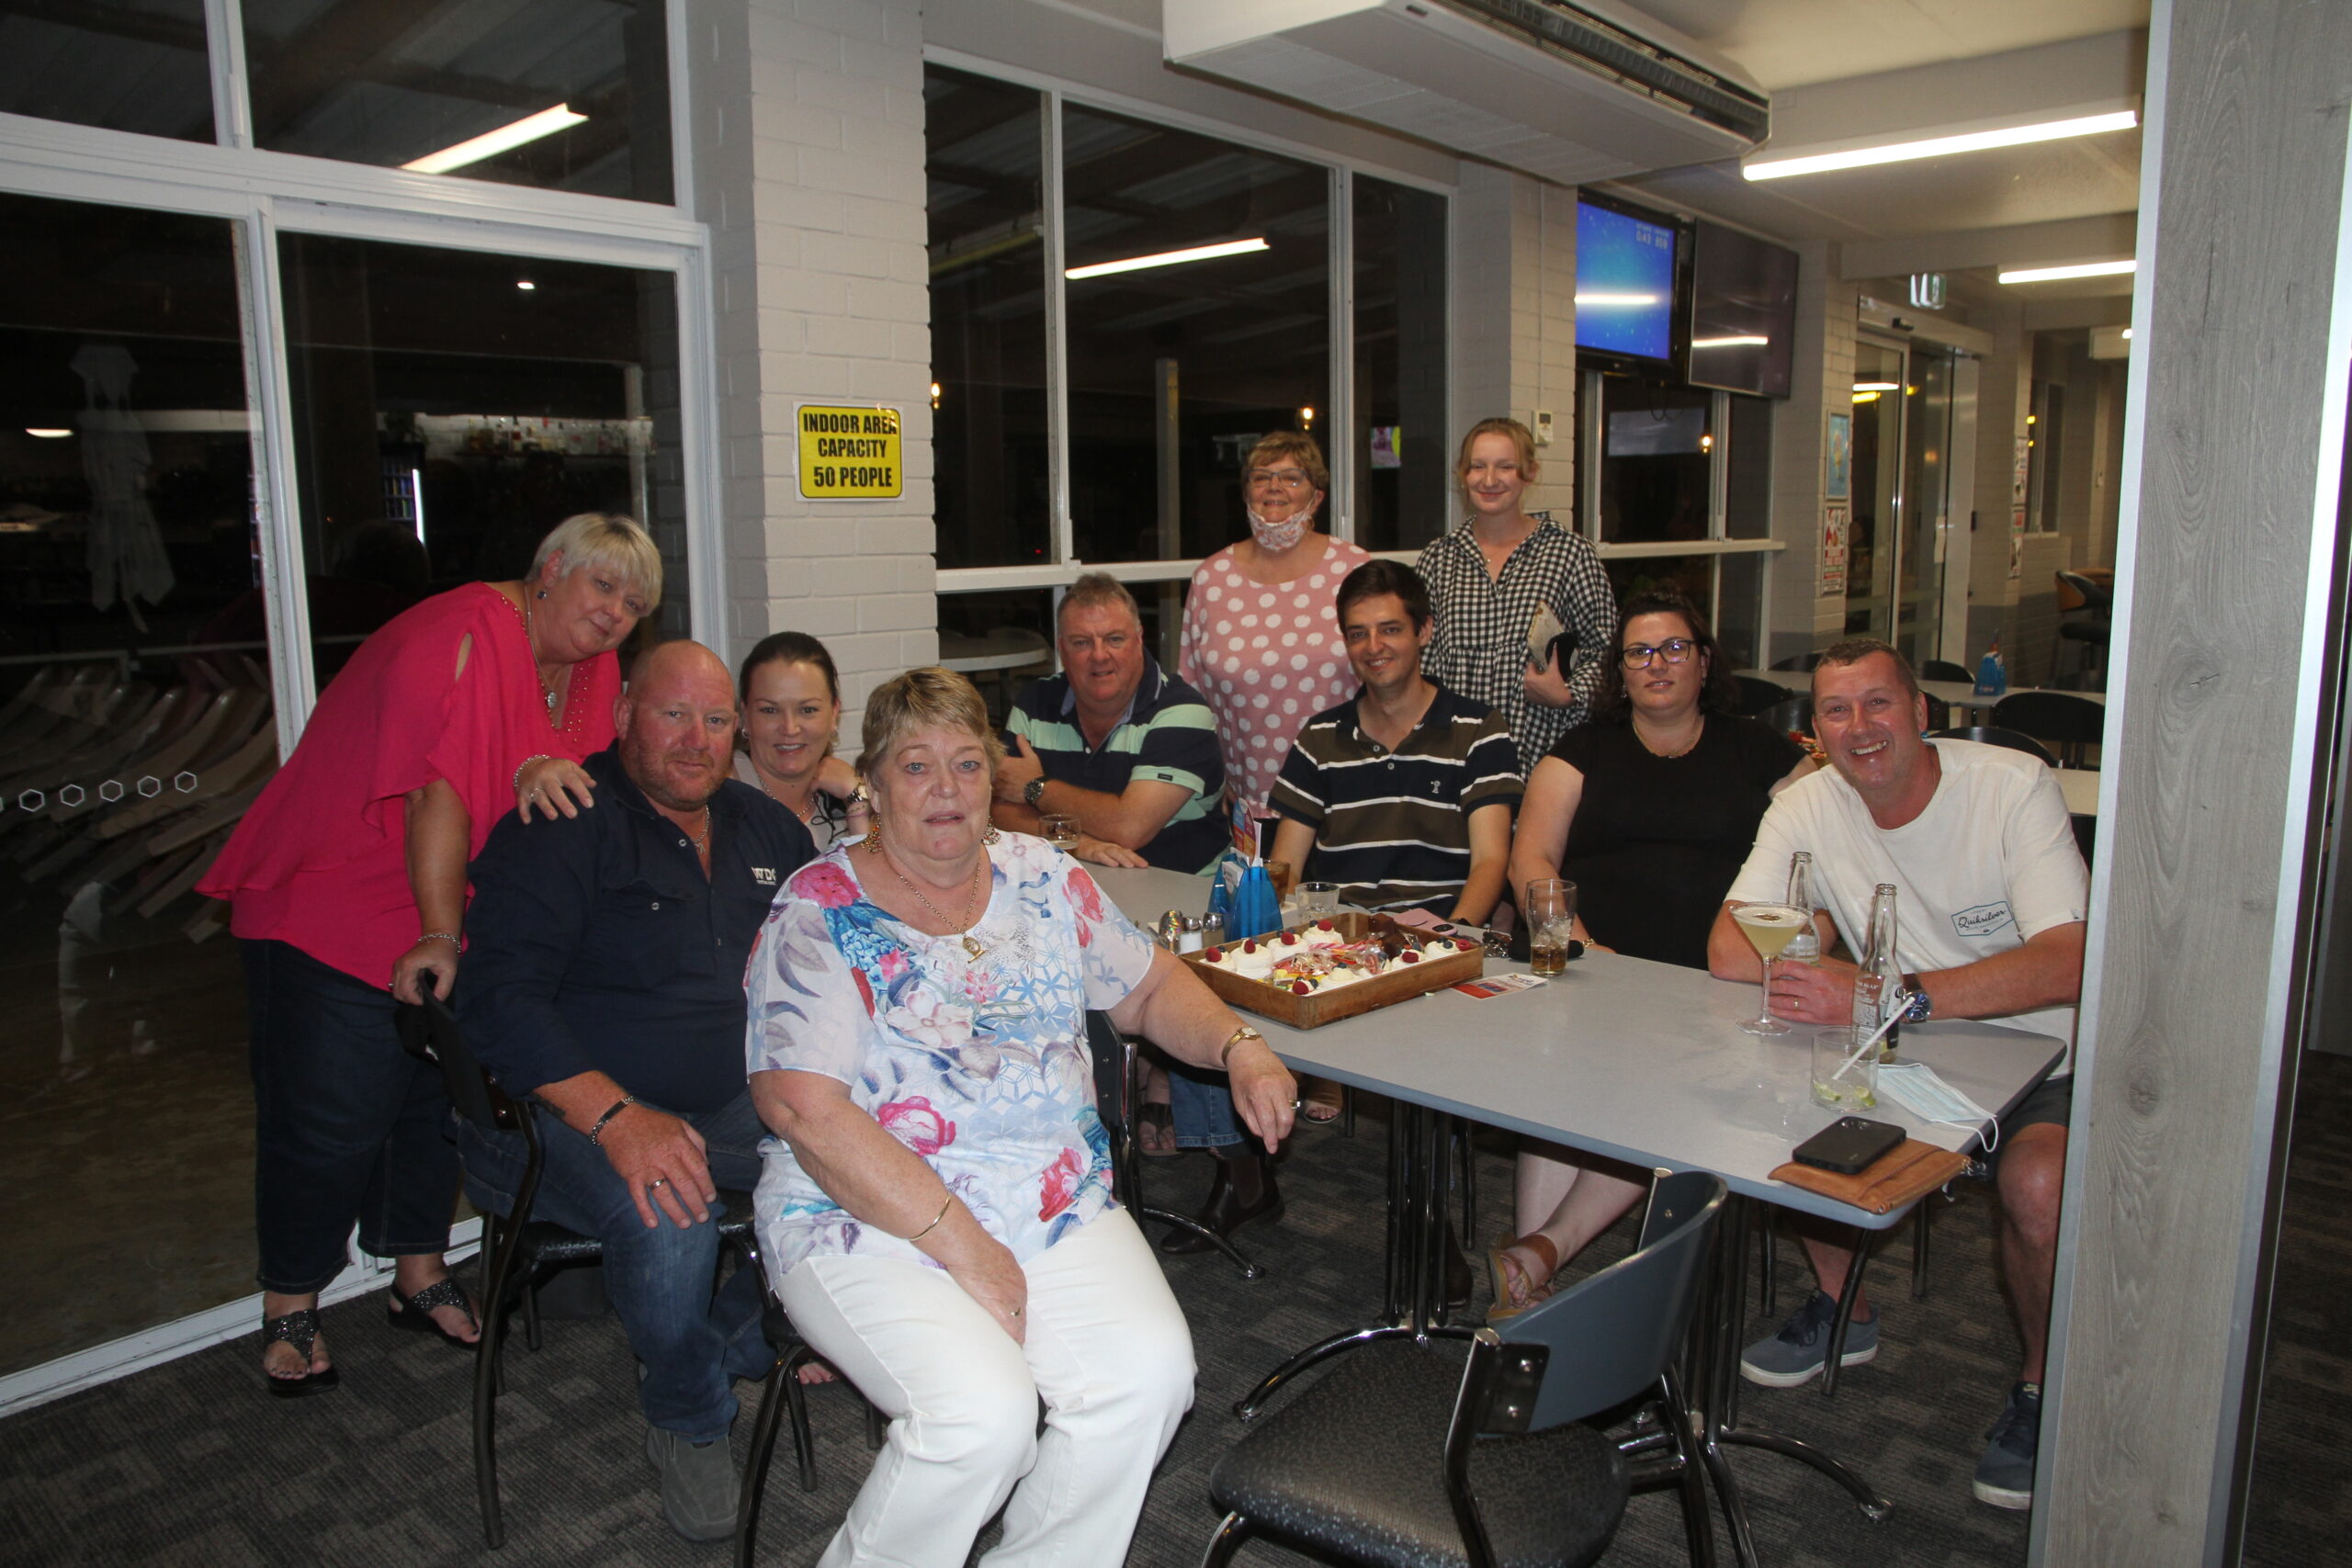 NAB CELEBRATING THEIR CHRISTMAS PARTY: From front, Barb Huggett, Rex and Kara Malone, Tania King, James Pitman, James Whitley, Katie Lovegrove, Anthony Schwager, and standing, Sheryl Ridley, Brandi Megson.